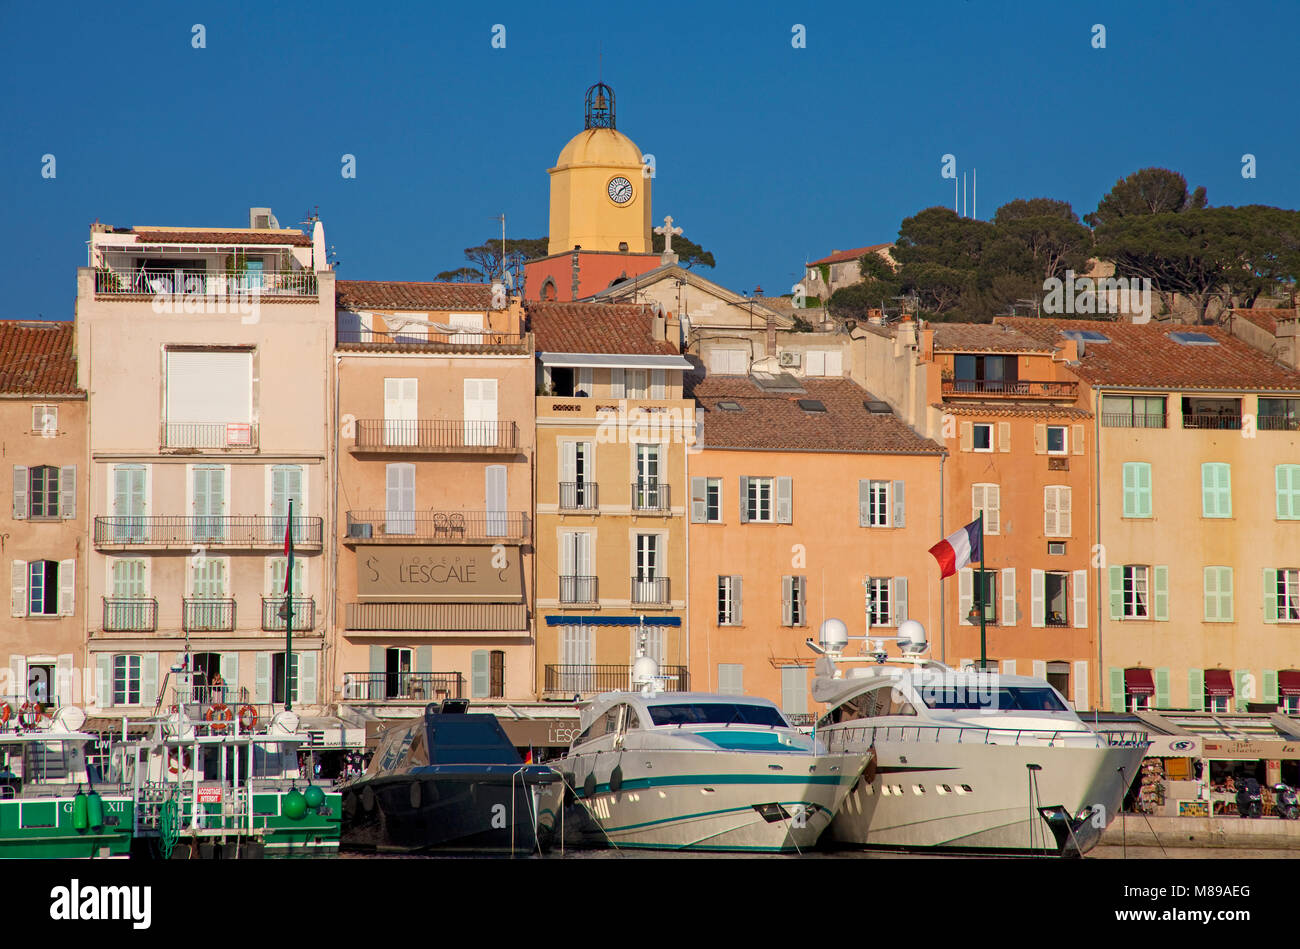 Evening mood at harbour of Saint-Tropez, luxury yachts at mooring ...